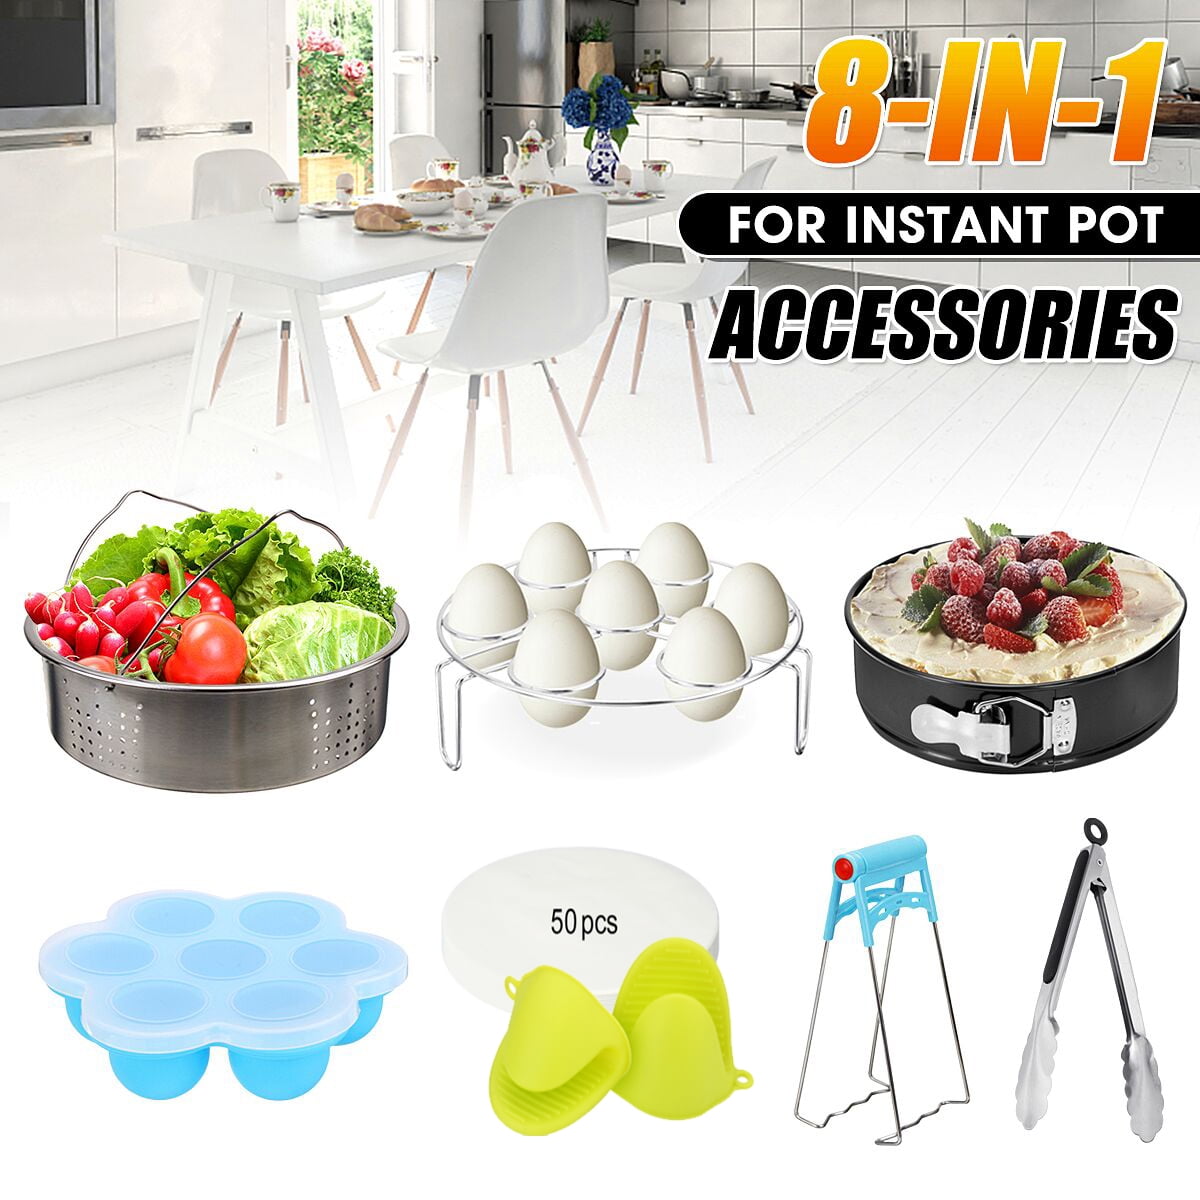 8 Pack Electric Pressure Cookers Accessories Set Compatible with Instant Pot  5, 6, 8 Quart, Steamer Basket, Egg - Bed Bath & Beyond - 35096958